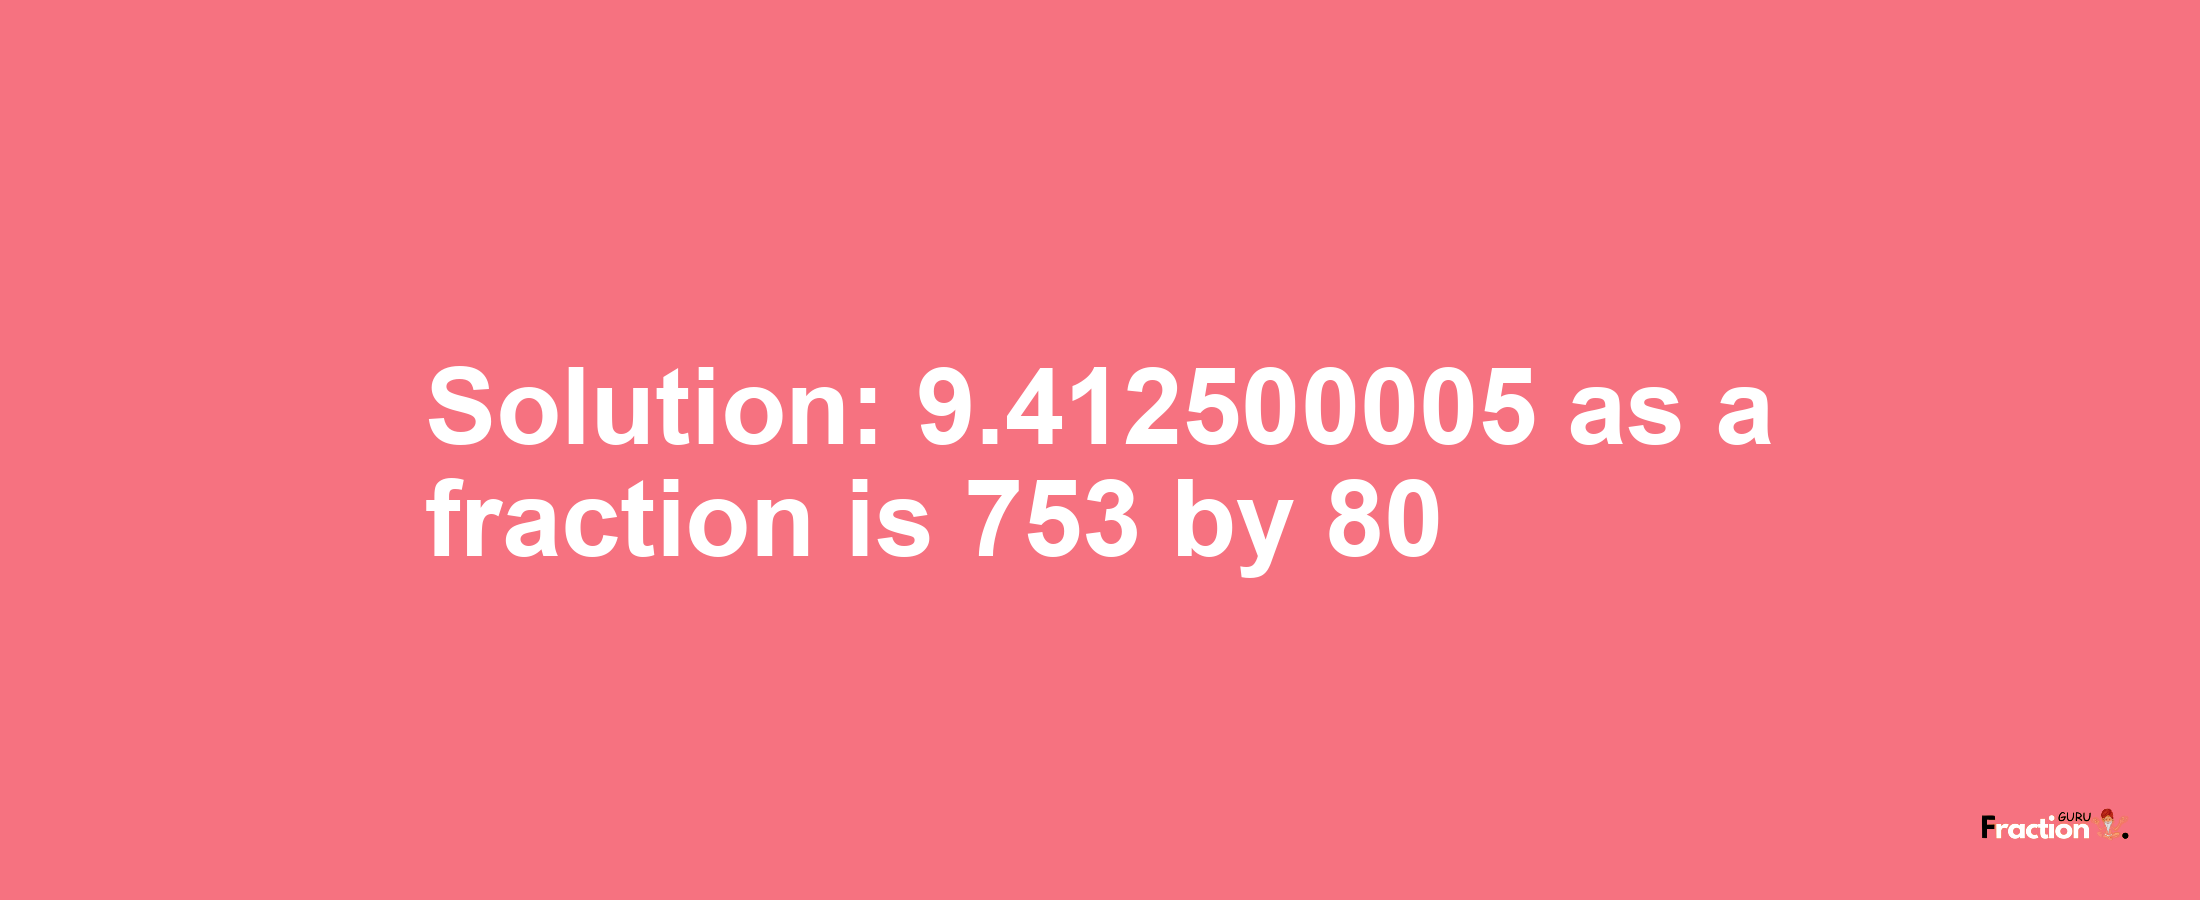 Solution:9.412500005 as a fraction is 753/80